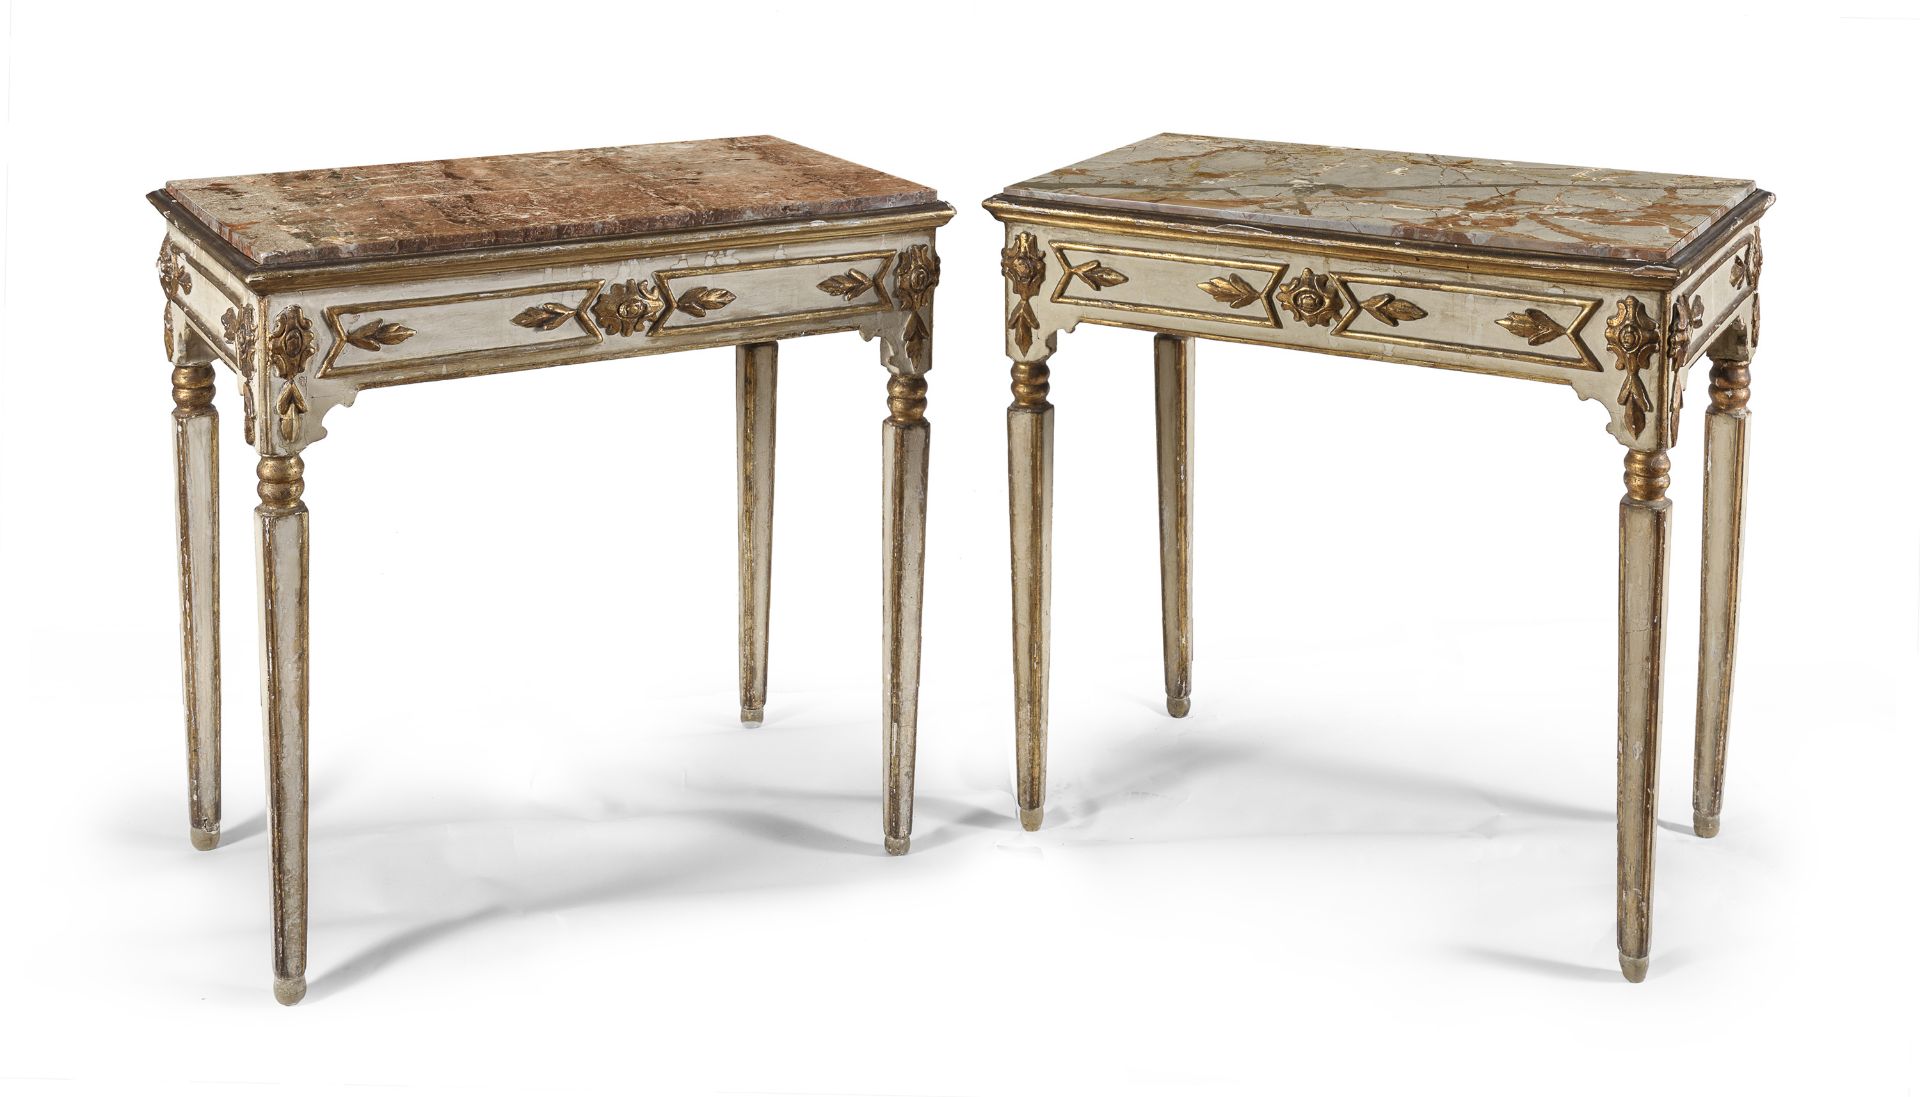 PAIR OF SMALL COFFEE TABLES NAPLES END OF THE 18TH CENTURY